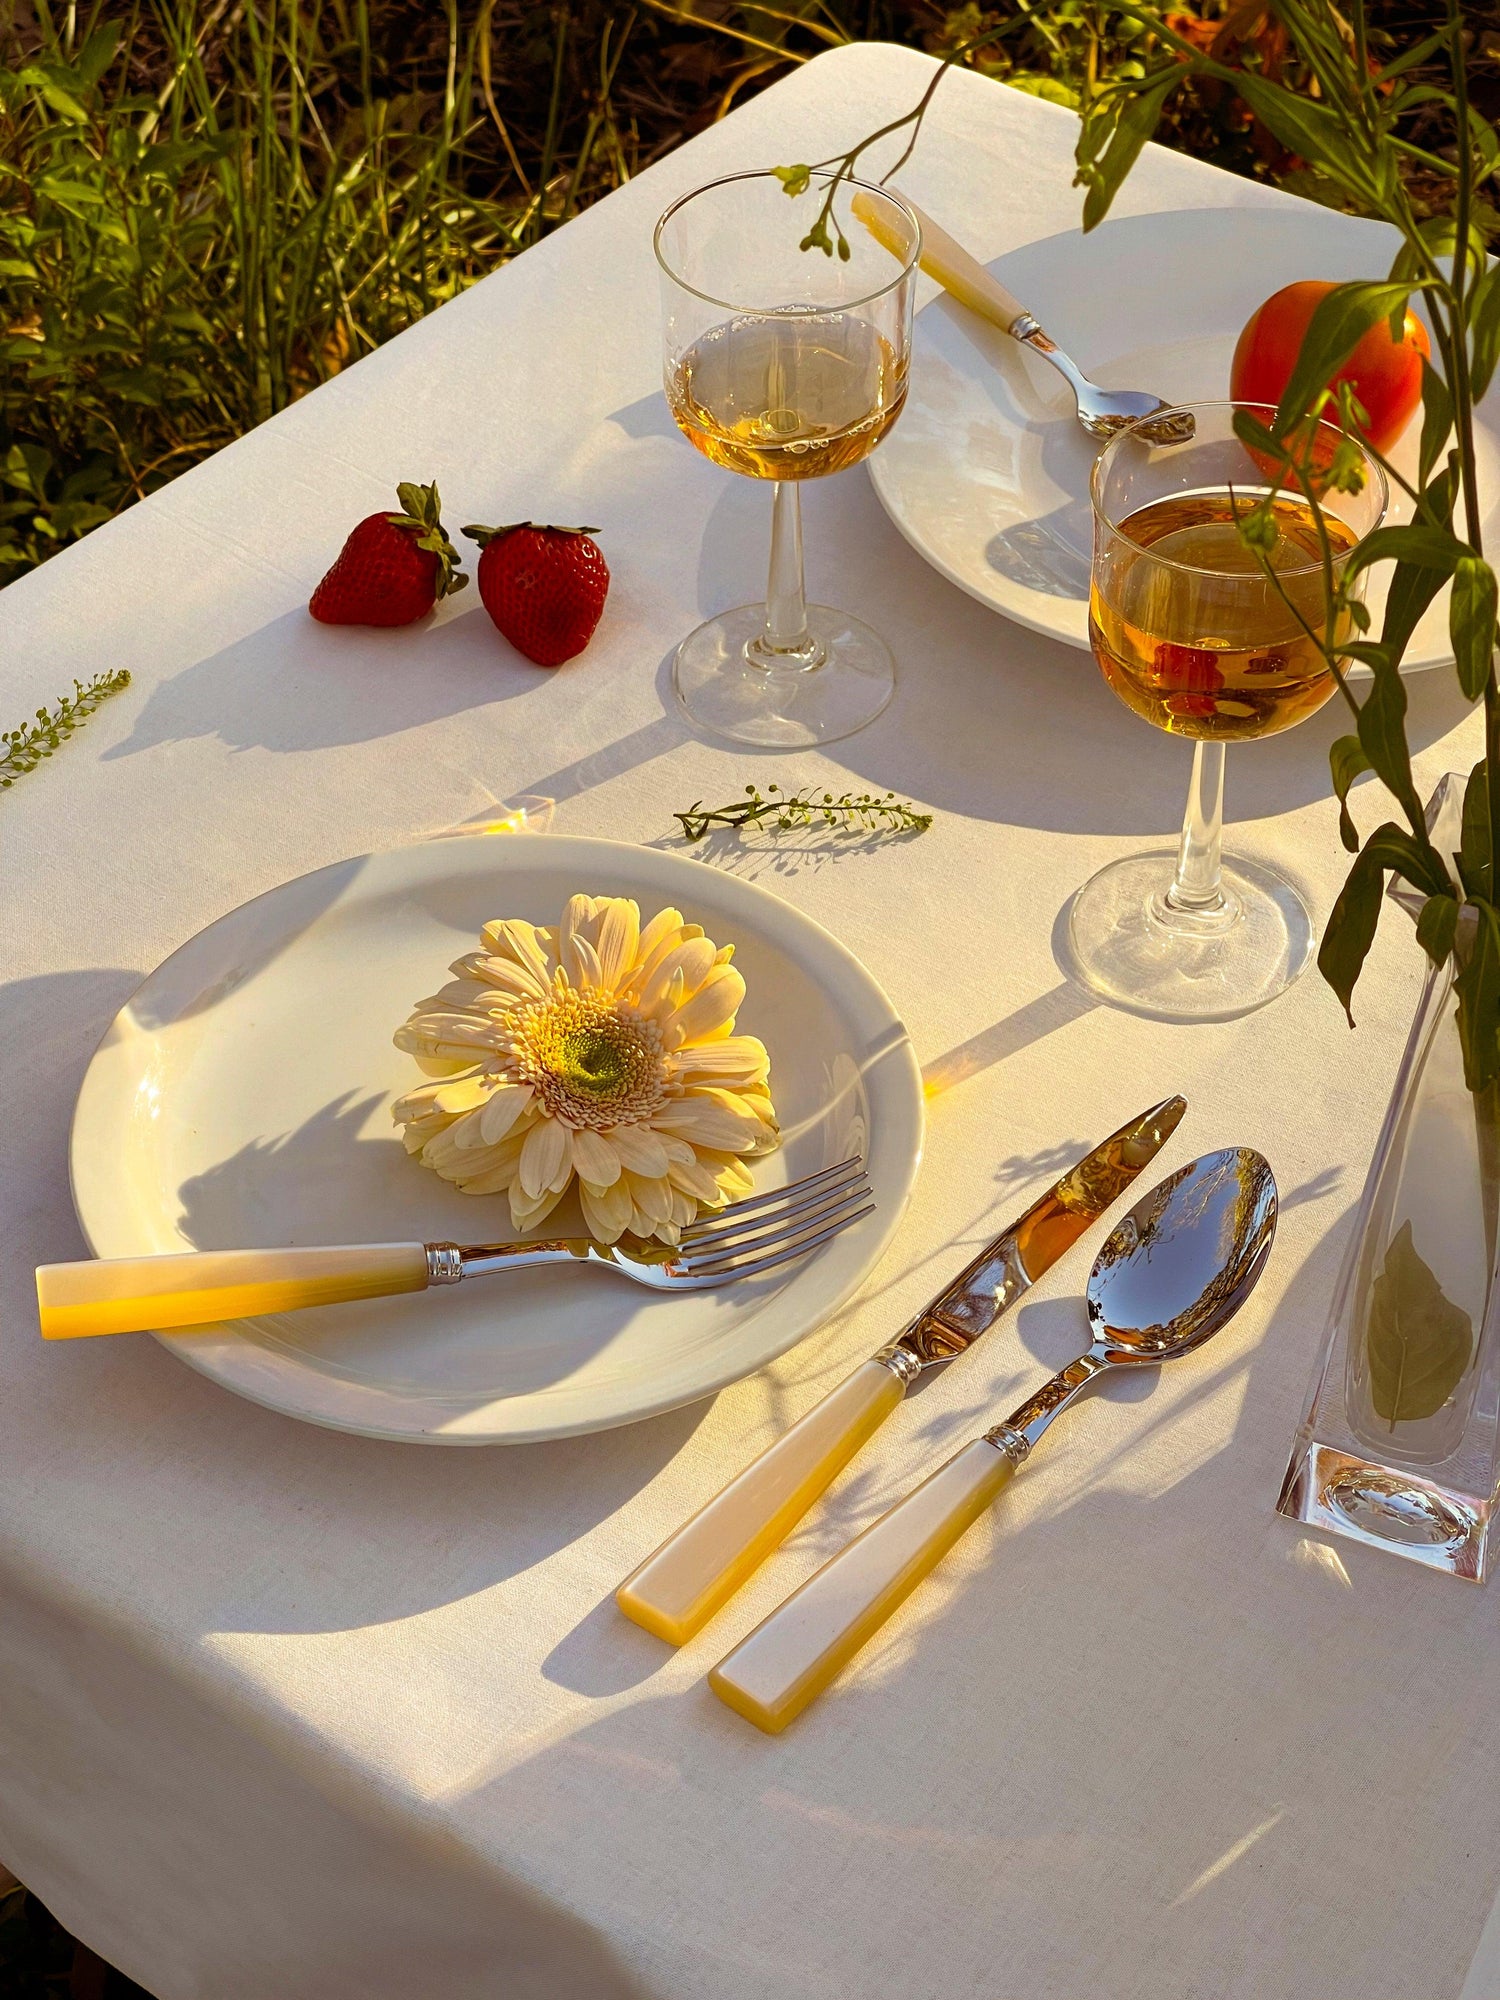 A stylish Pearl Cutlery Set of 5 with a plate, fork, and knife on a table with wine glasses.